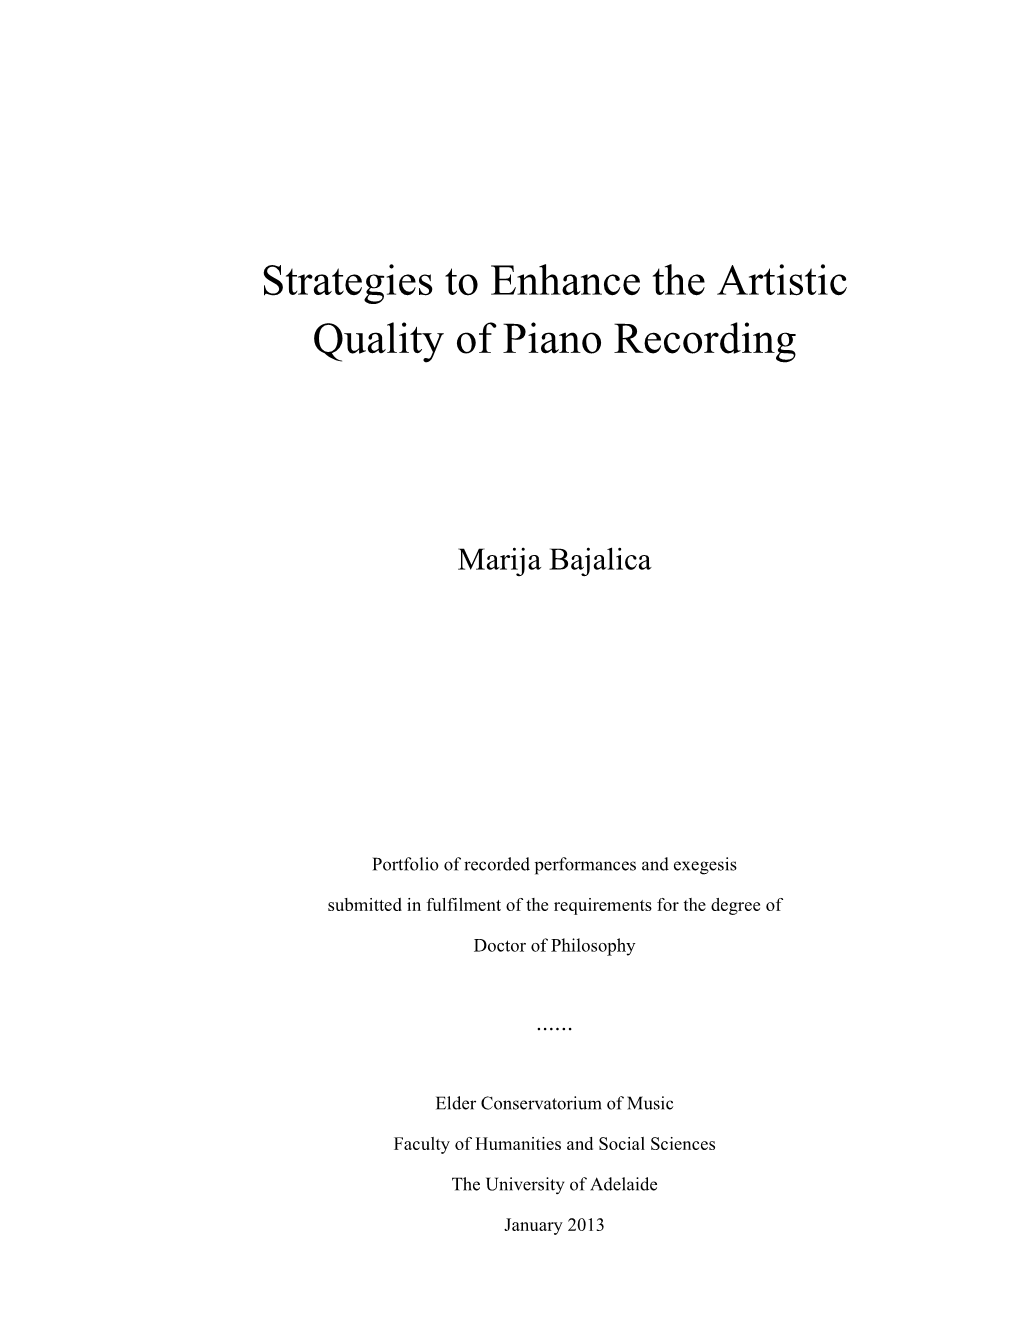 Strategies to Enhance the Artistic Quality of Piano Recording